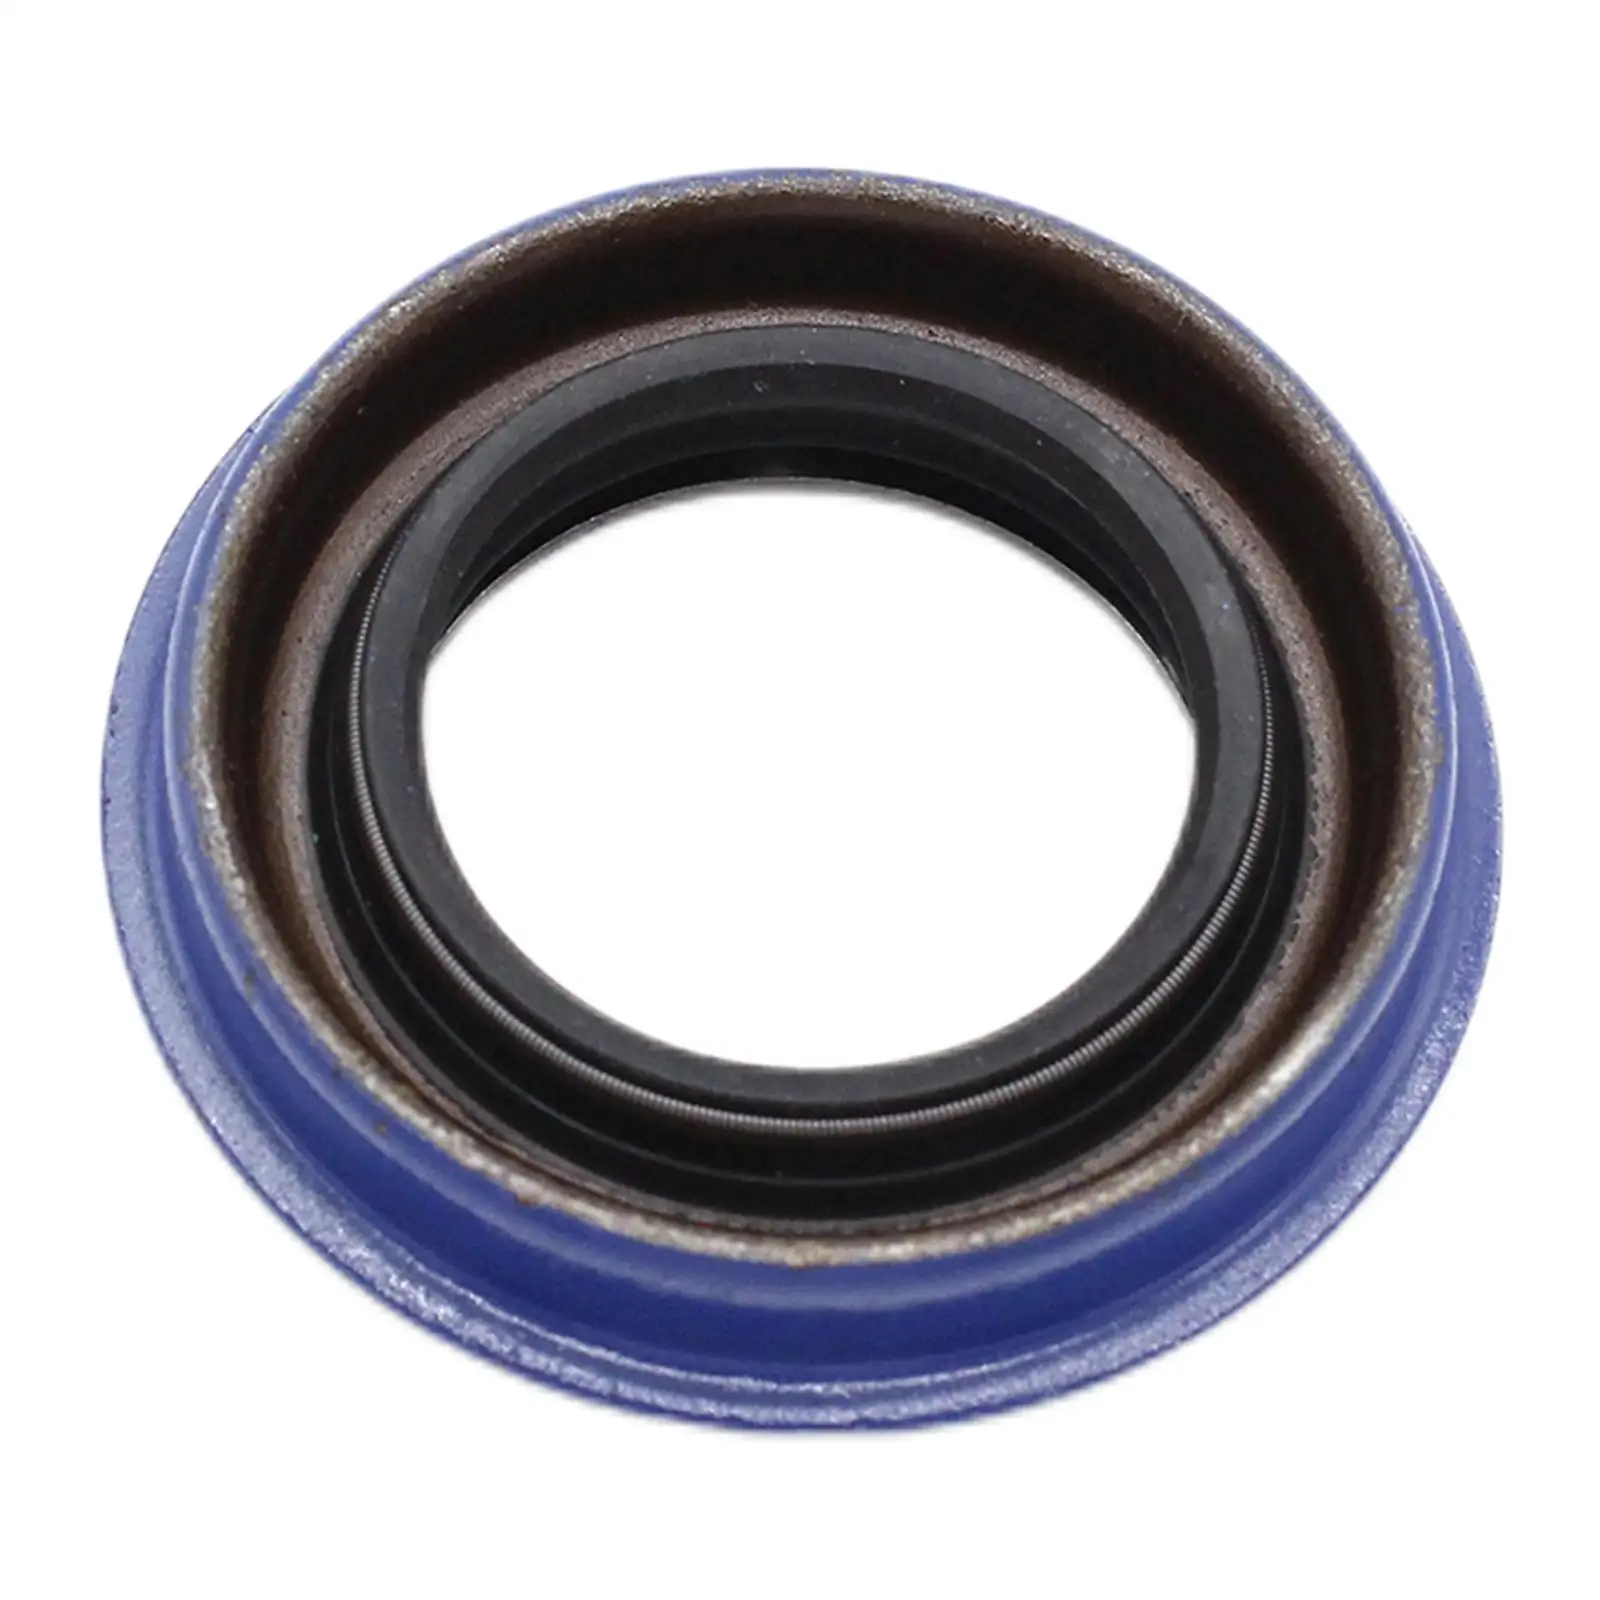 

Drive Shaft Oil Seal 12755013 Replace Engine Front Wheel Drive Axle Shaft Seal Fit for Vauxhall for Opel Sintra Vectra F35 M20